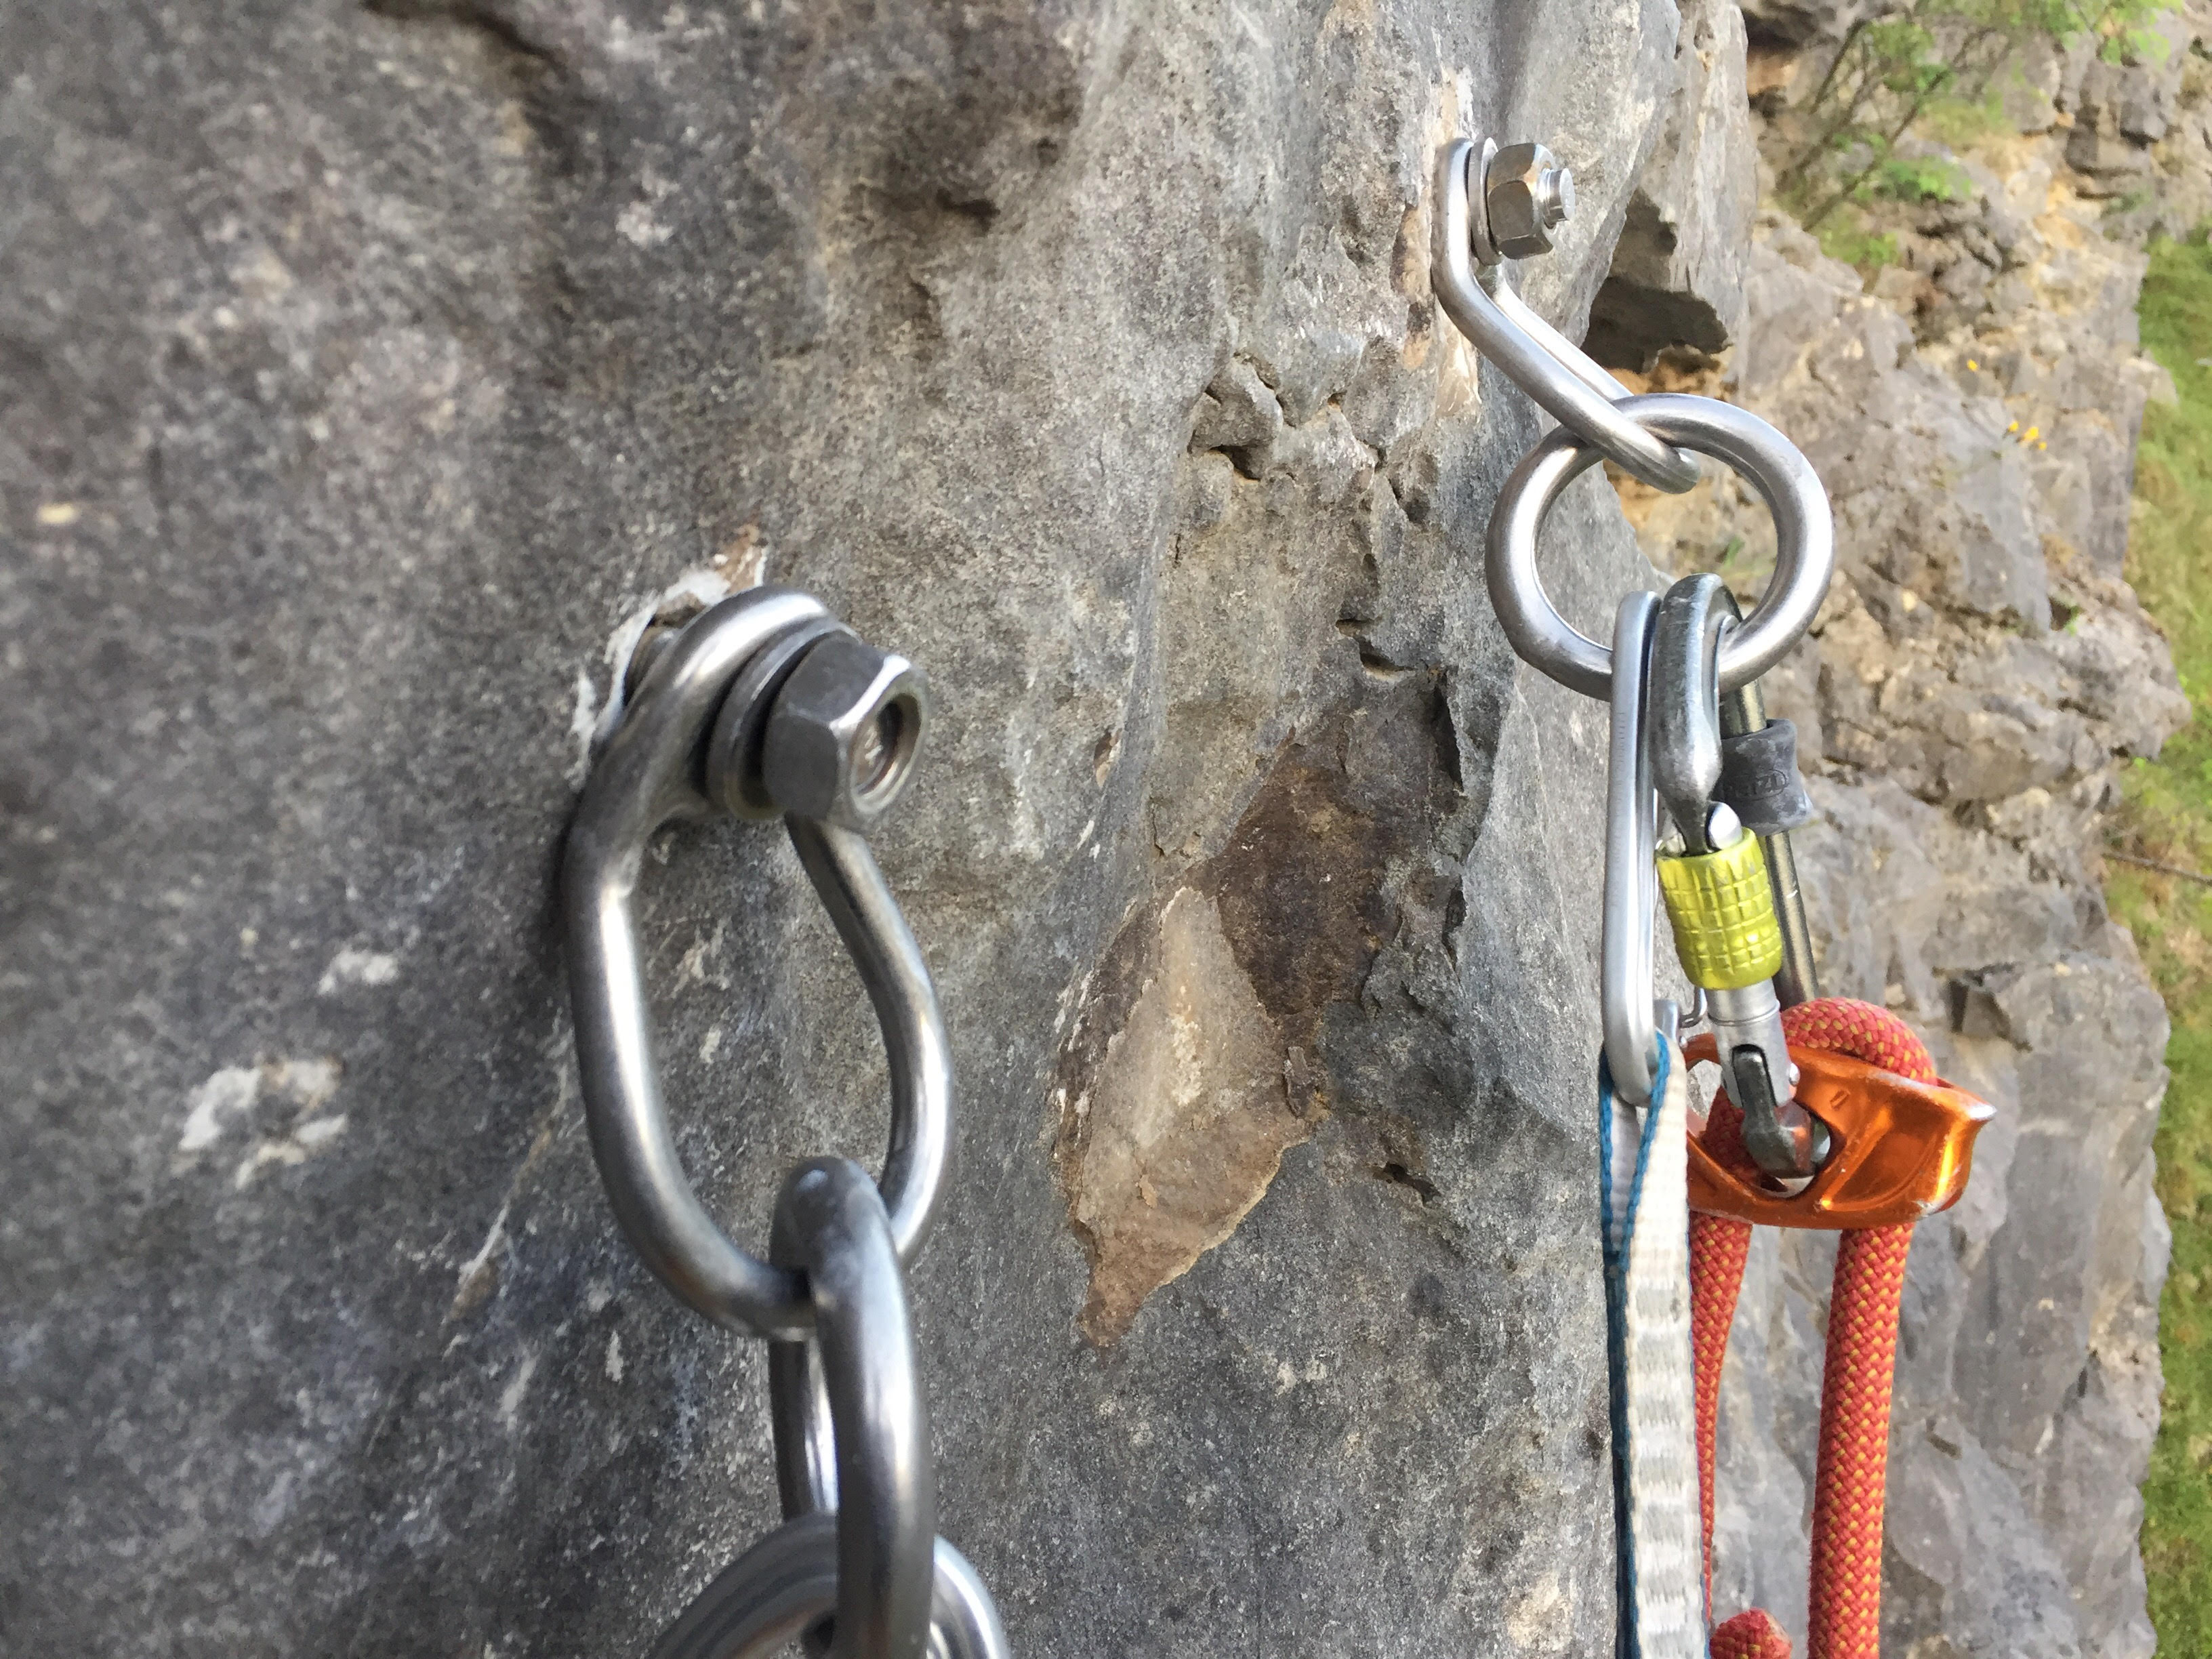 Incident: 15/06/21 gilwern central sport climb